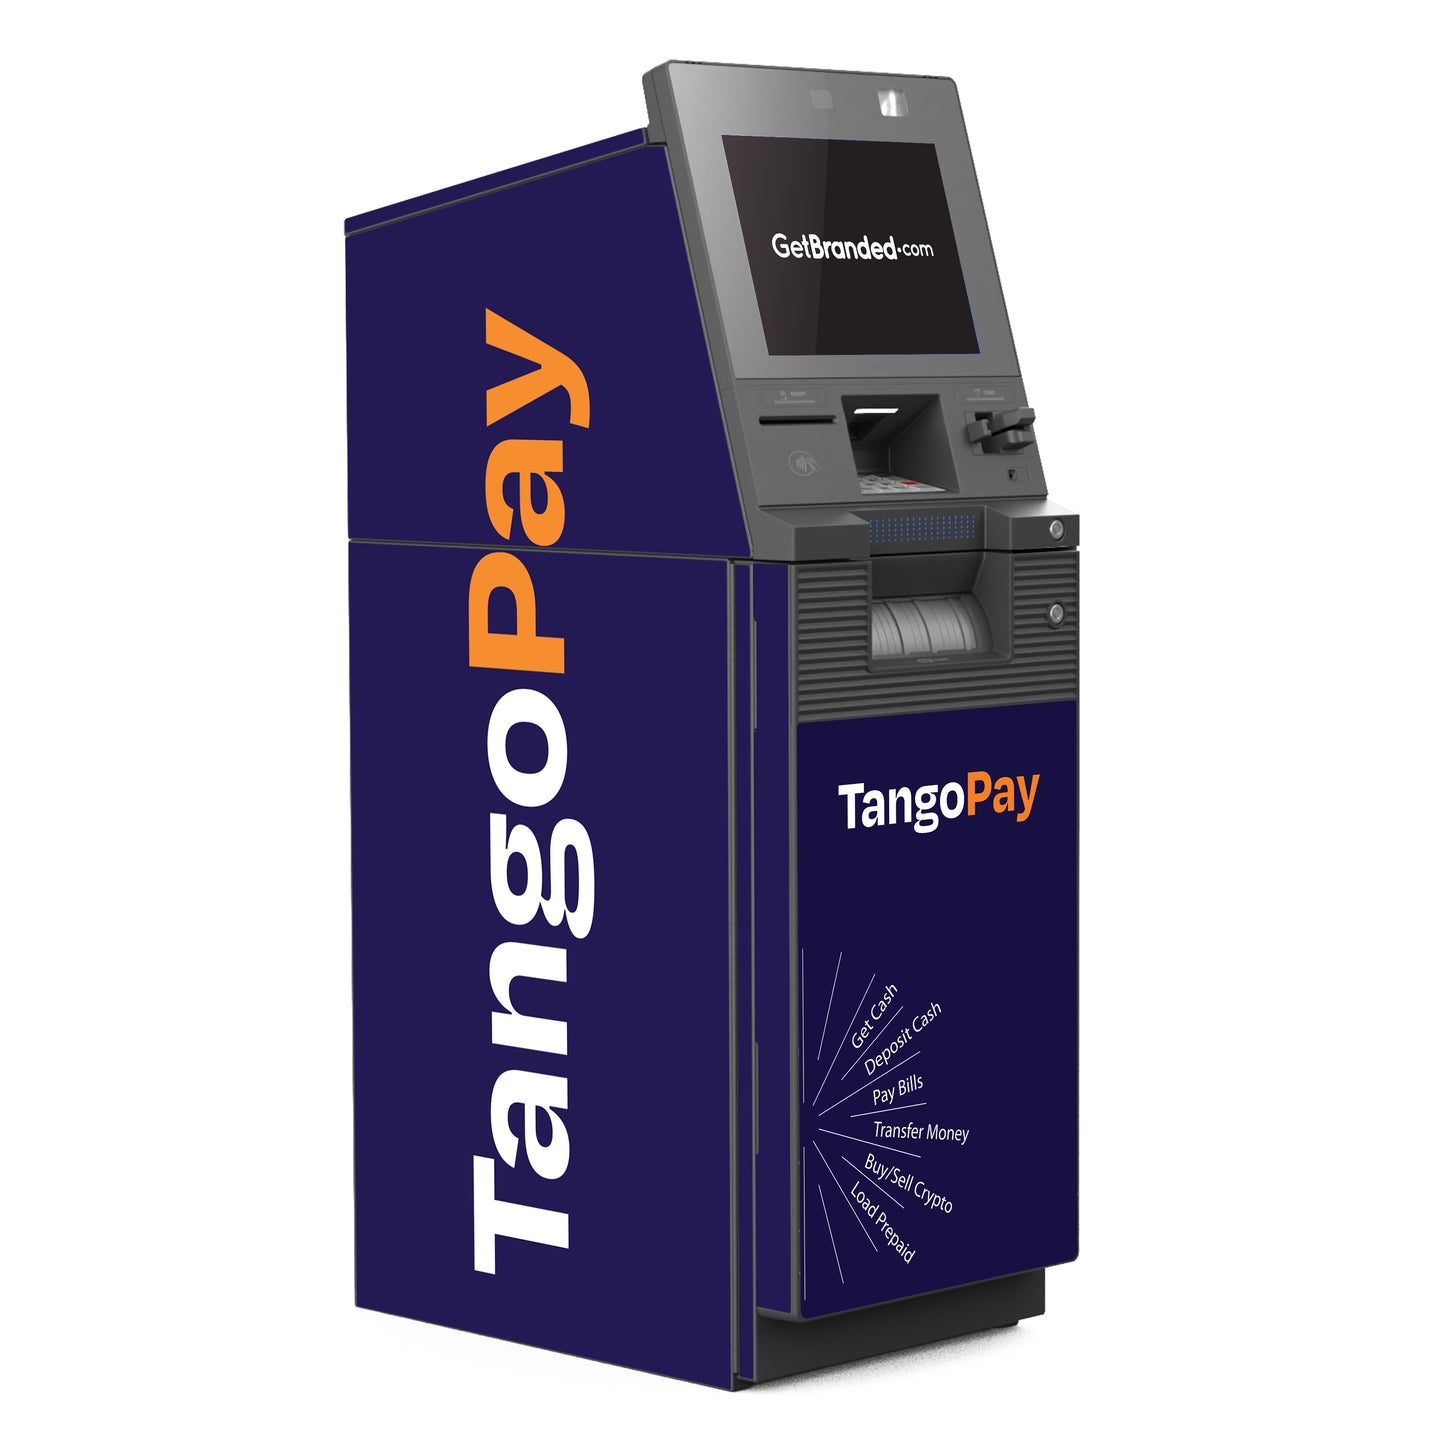 Hyosung Pivot ATM with TangoPay wrap installed